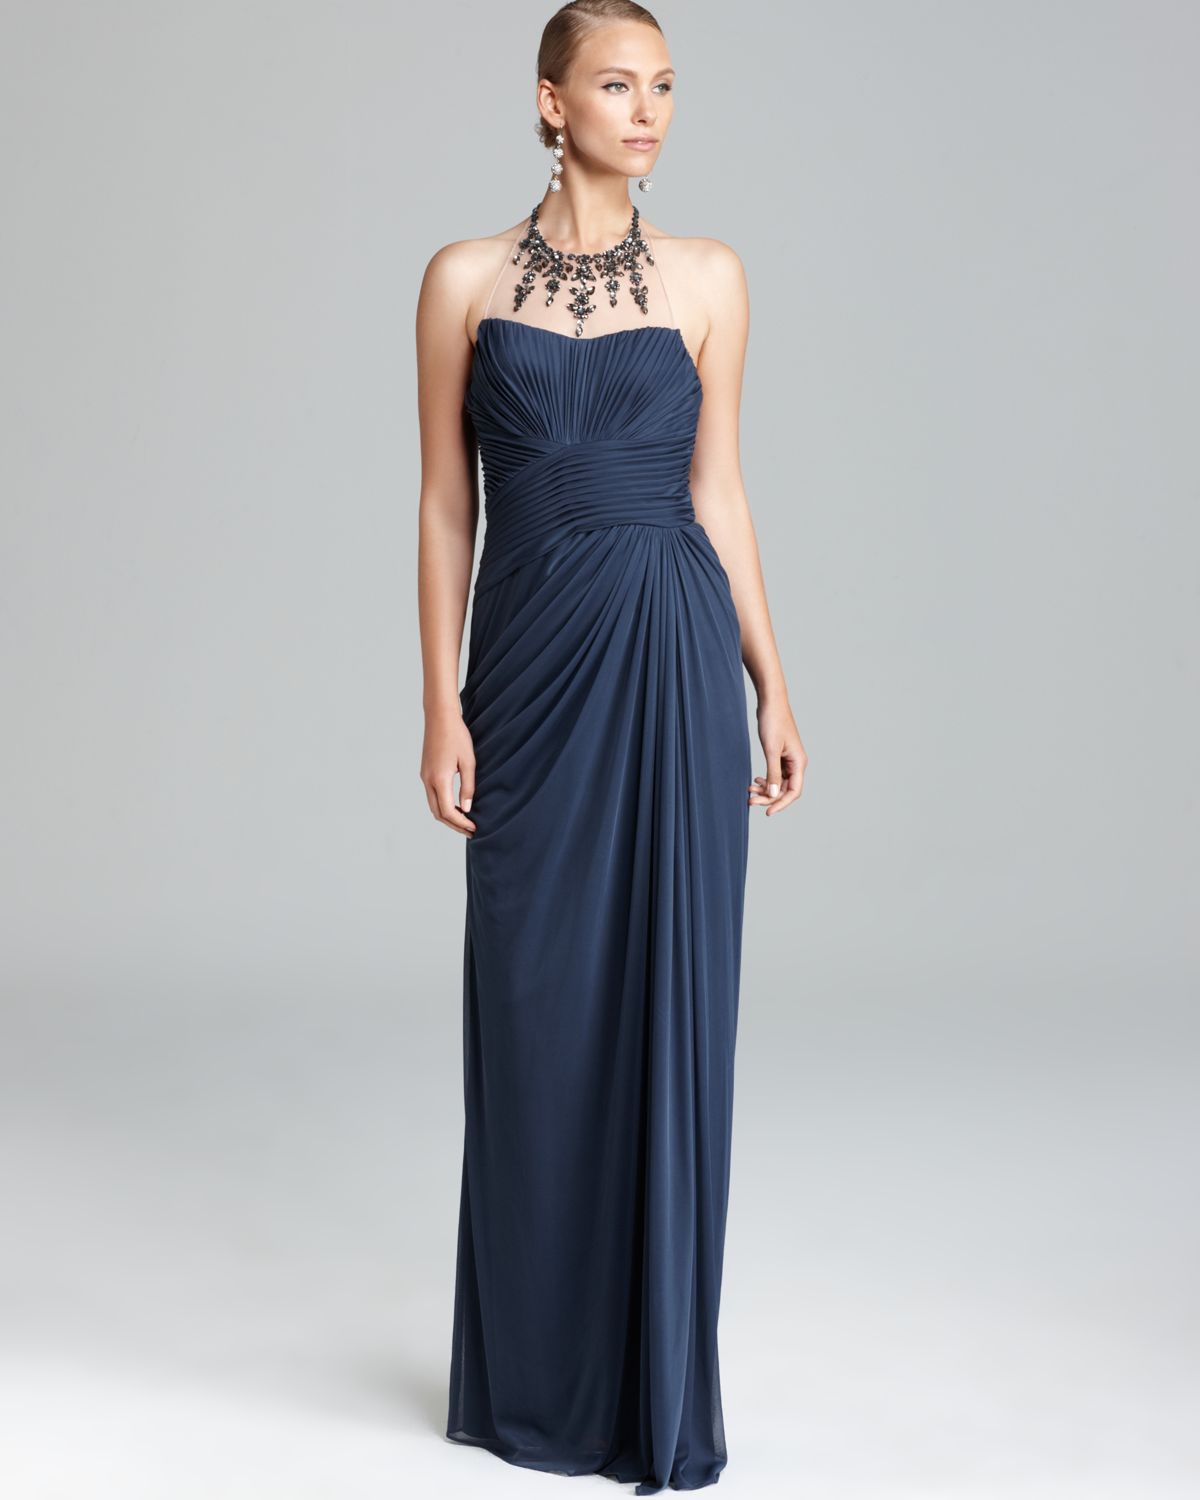 Lyst - Adrianna Papell Jewel Illusion Gown Halter in Blue